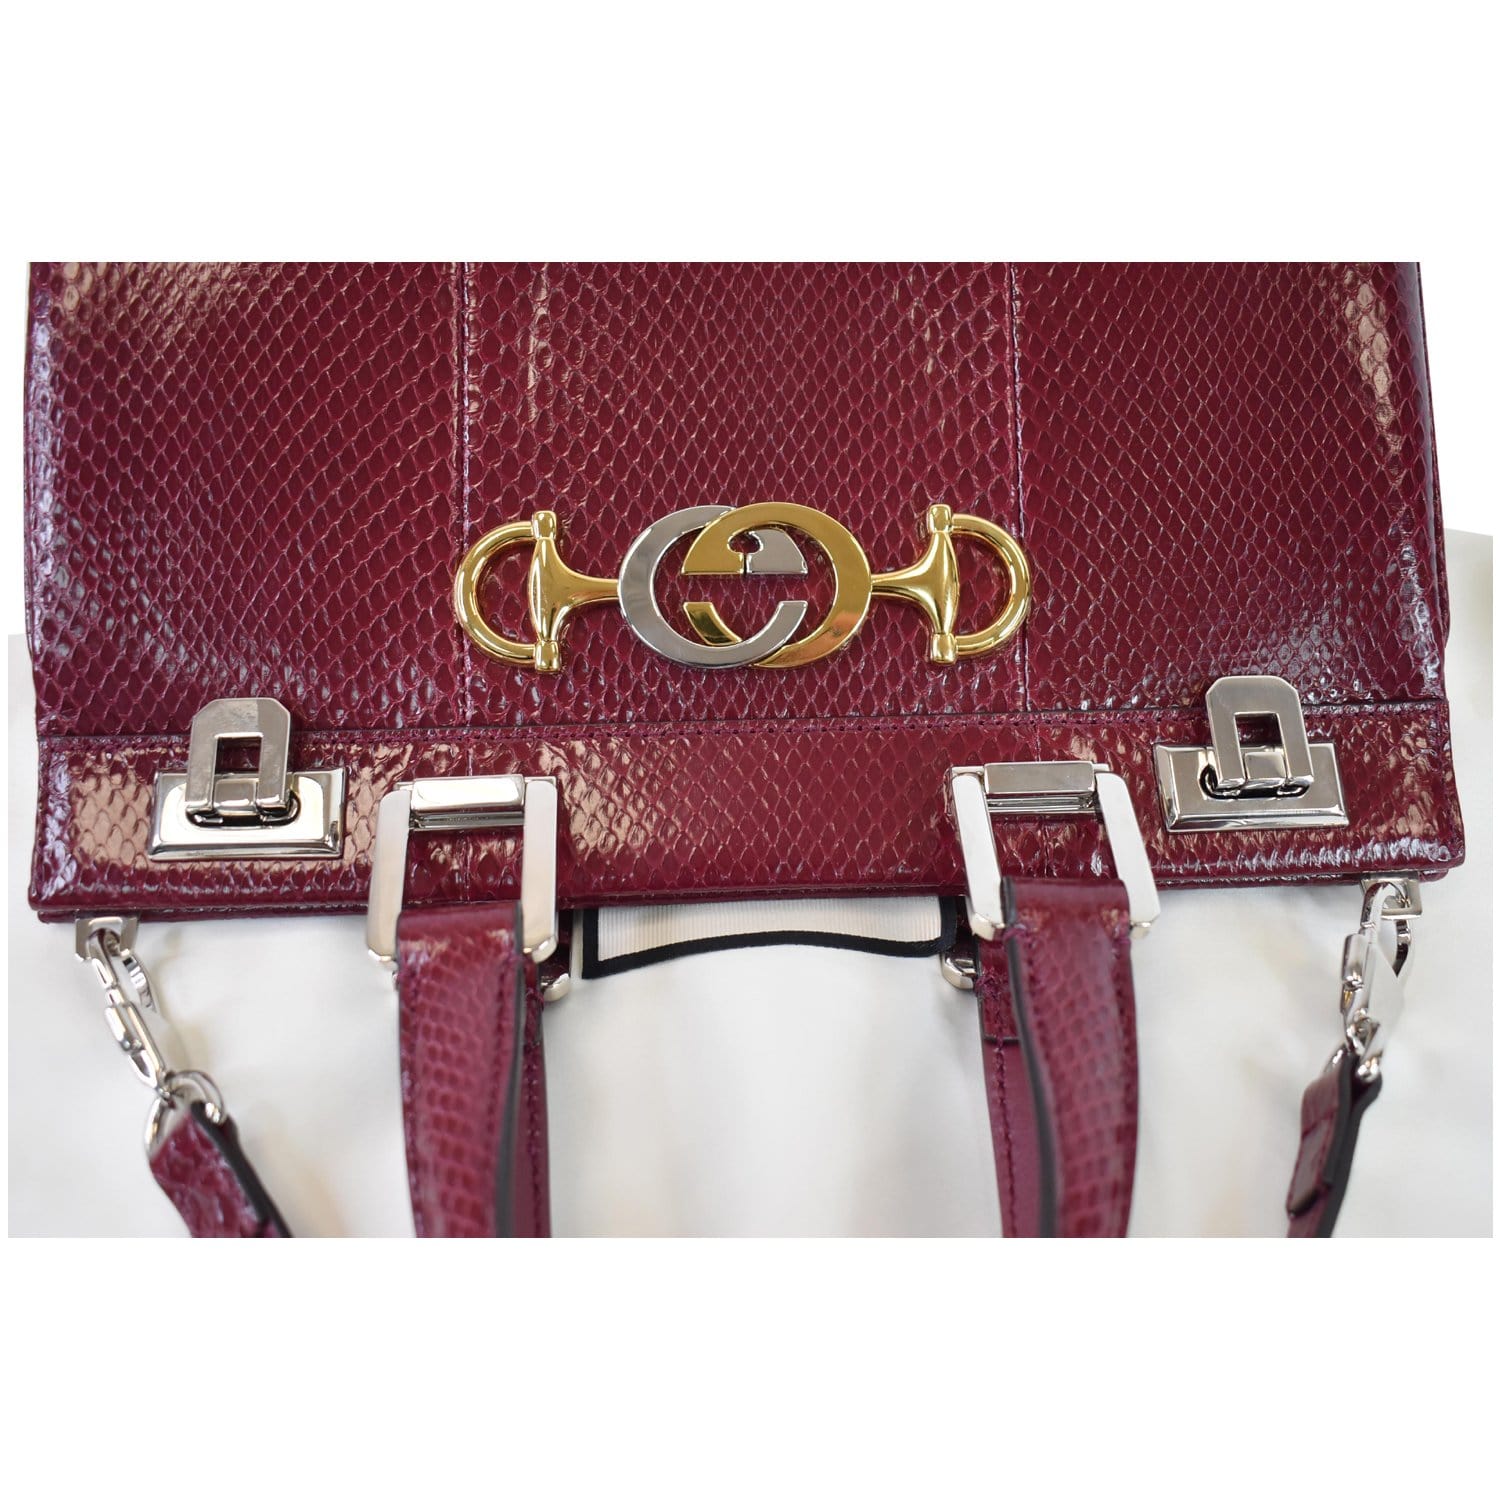 $2,700 GUCCI New AUTHENTIC Zumi Burgundy Red Snake Leather Small